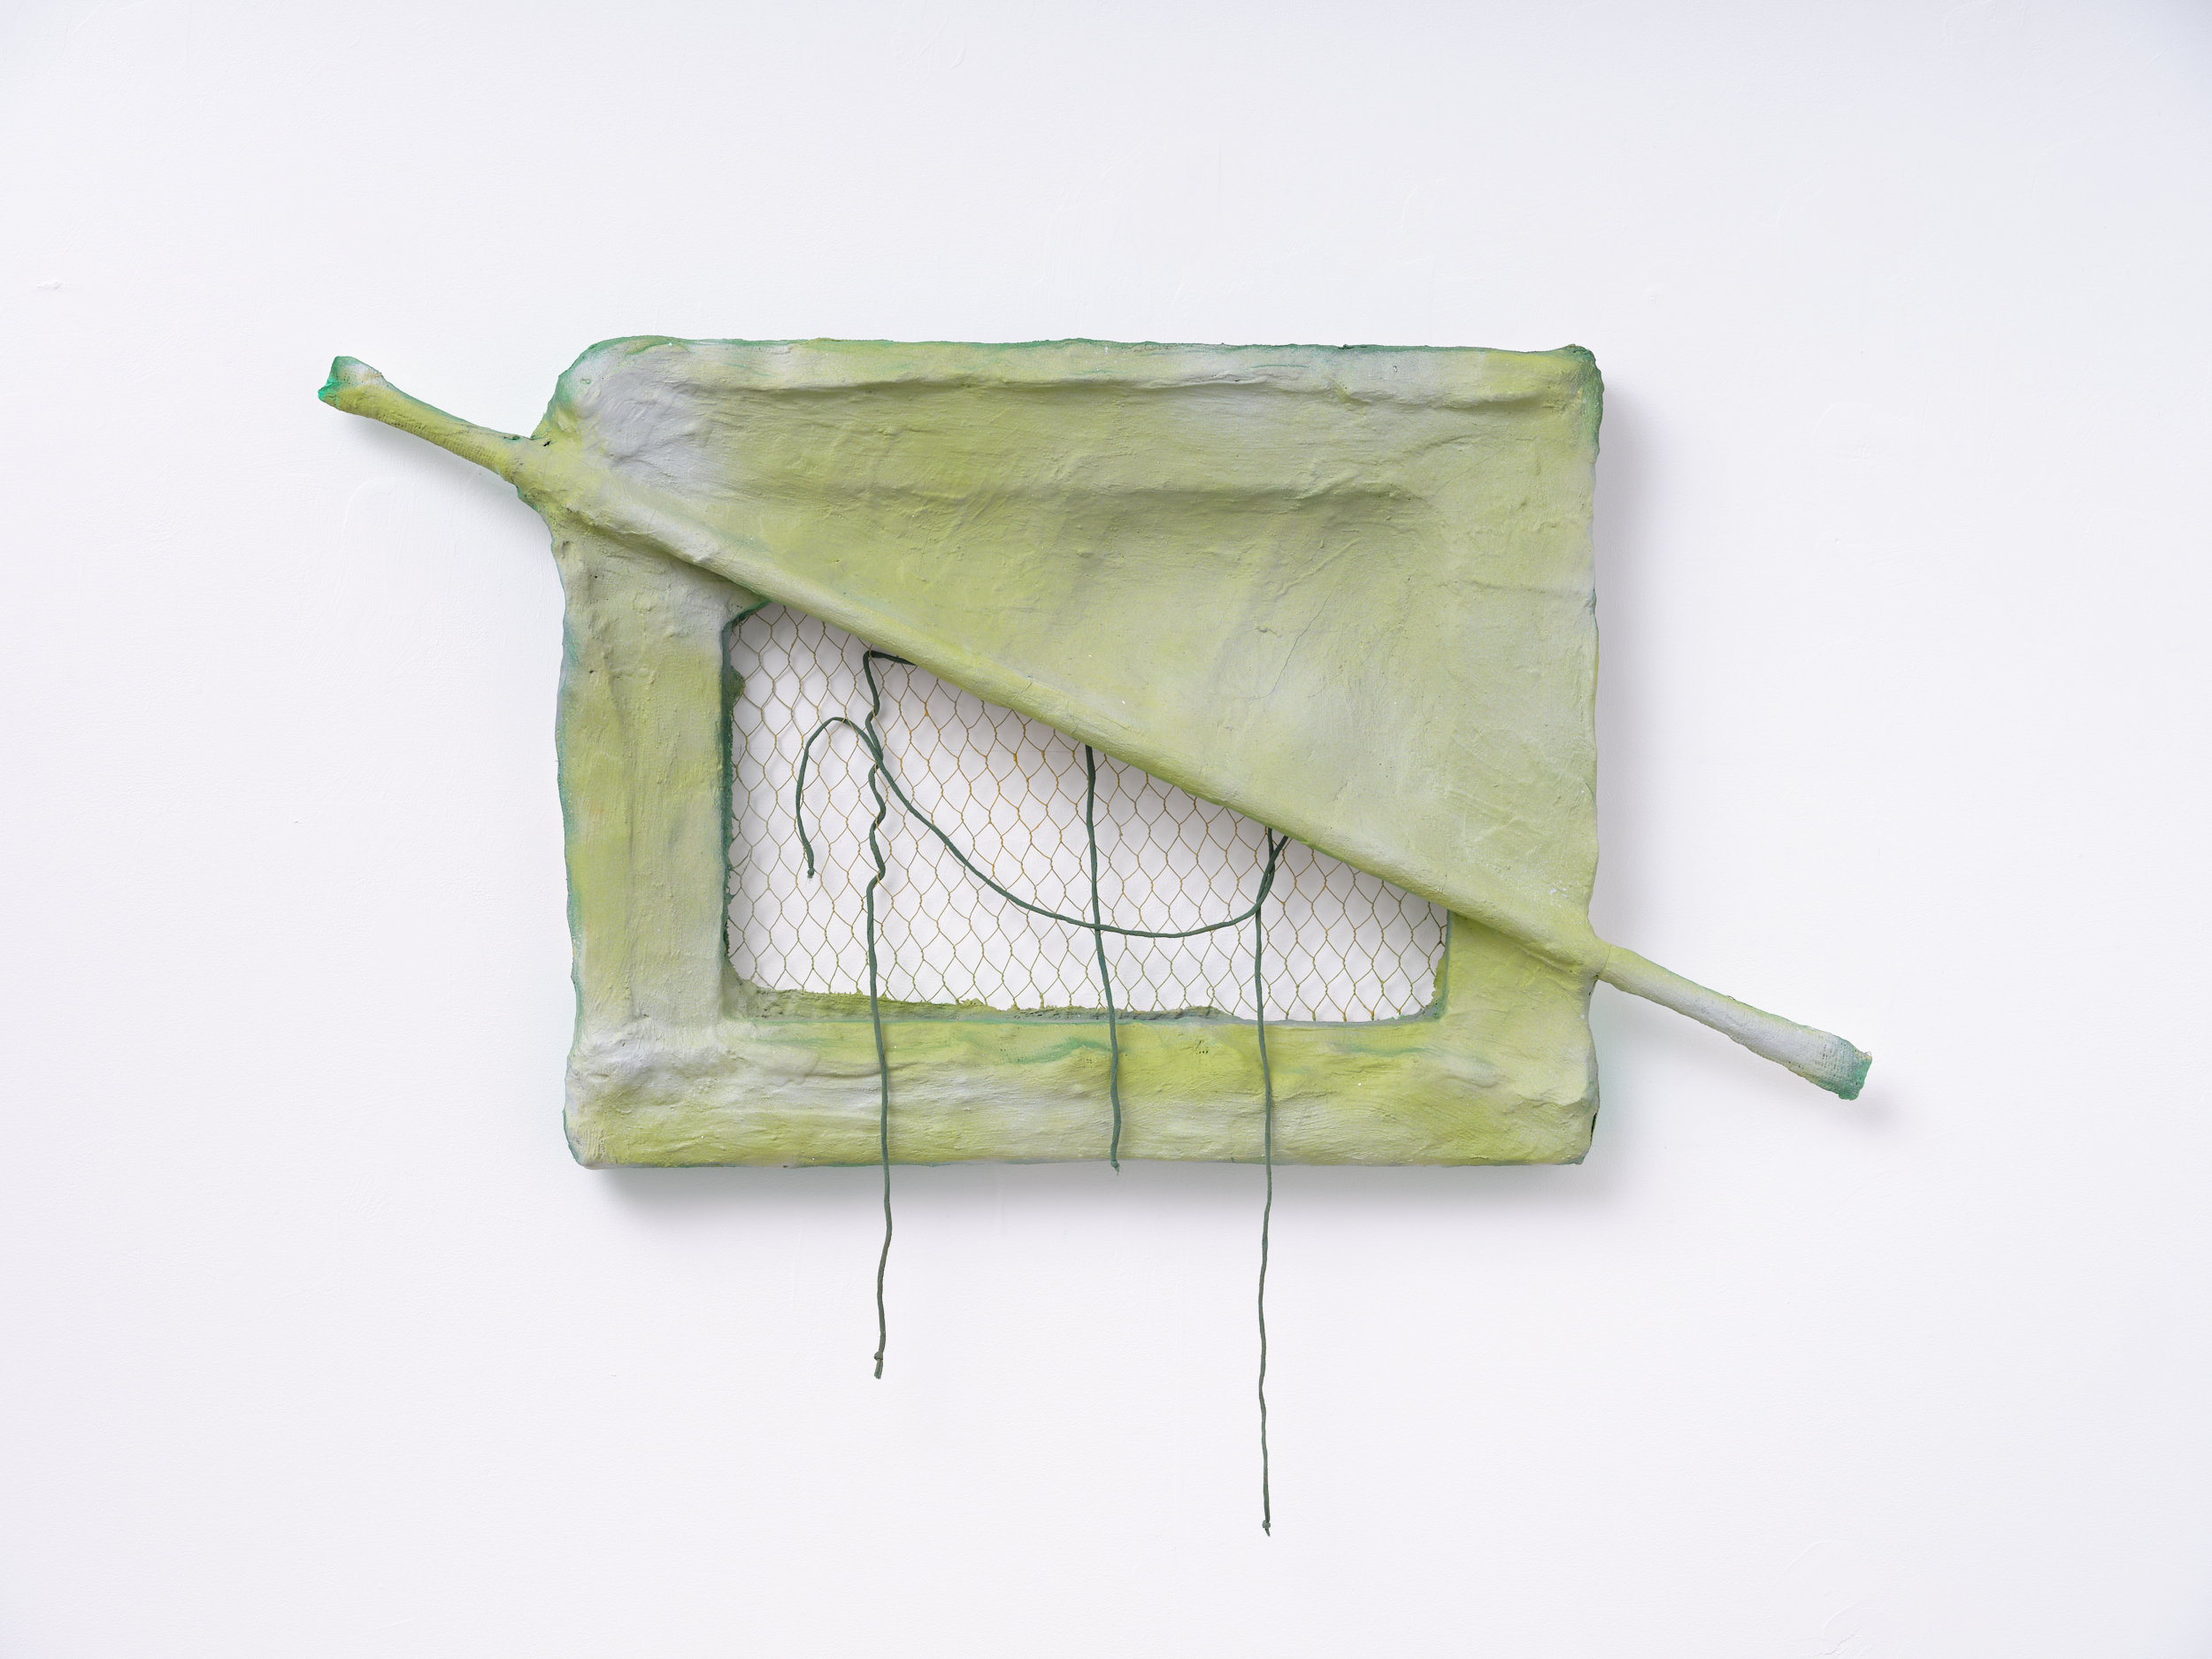 Sculptural painting by Rachel Walters in Plaster bandage, chicken wire, plumbers pipe, oil, acrylic and silk thread on stretcher titled Another Human